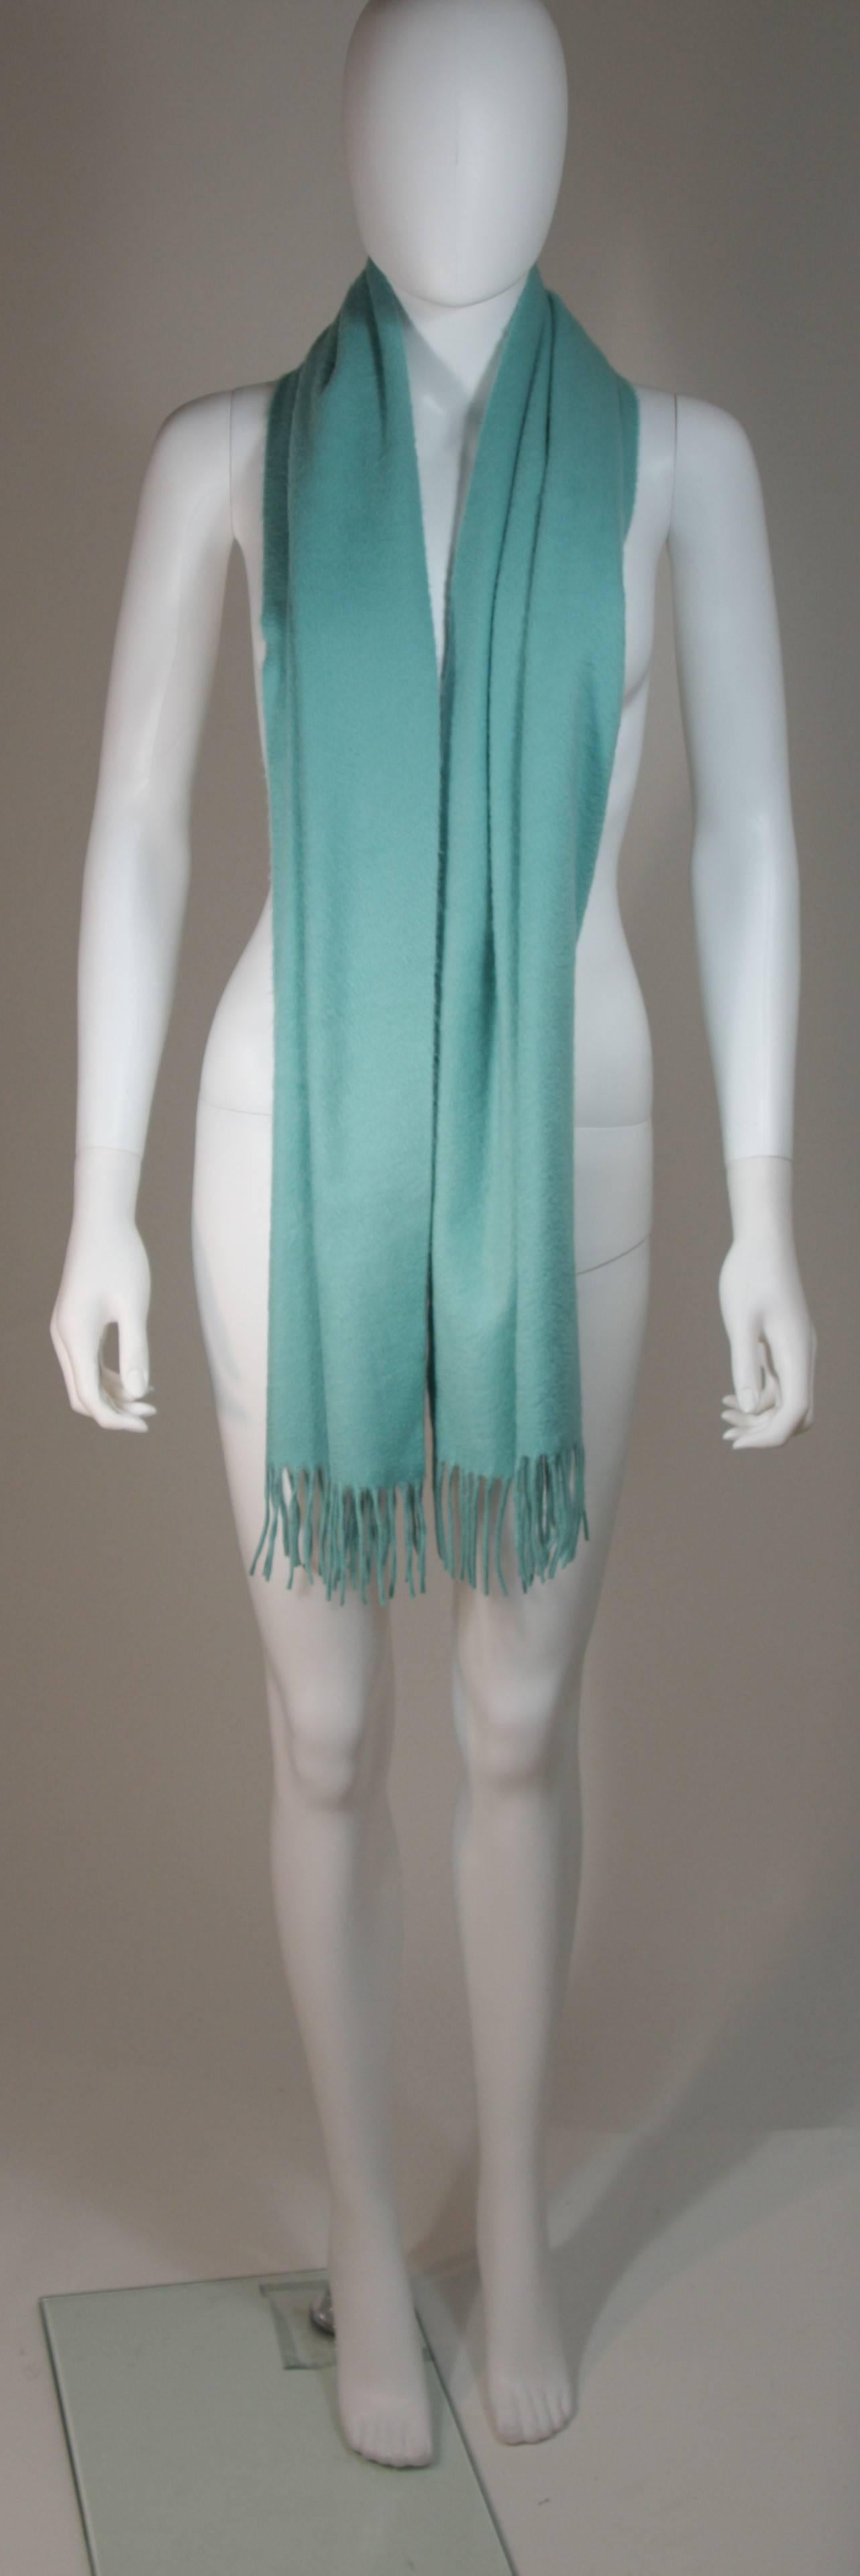 This Yves Saint Laurent design is available for viewing at our Beverly Hills Boutique. We offer a large selection of evening gowns and luxury garments. 

 This scarf is composed of an ultra soft cashmere in an aqua hue. Features fringe ends. In